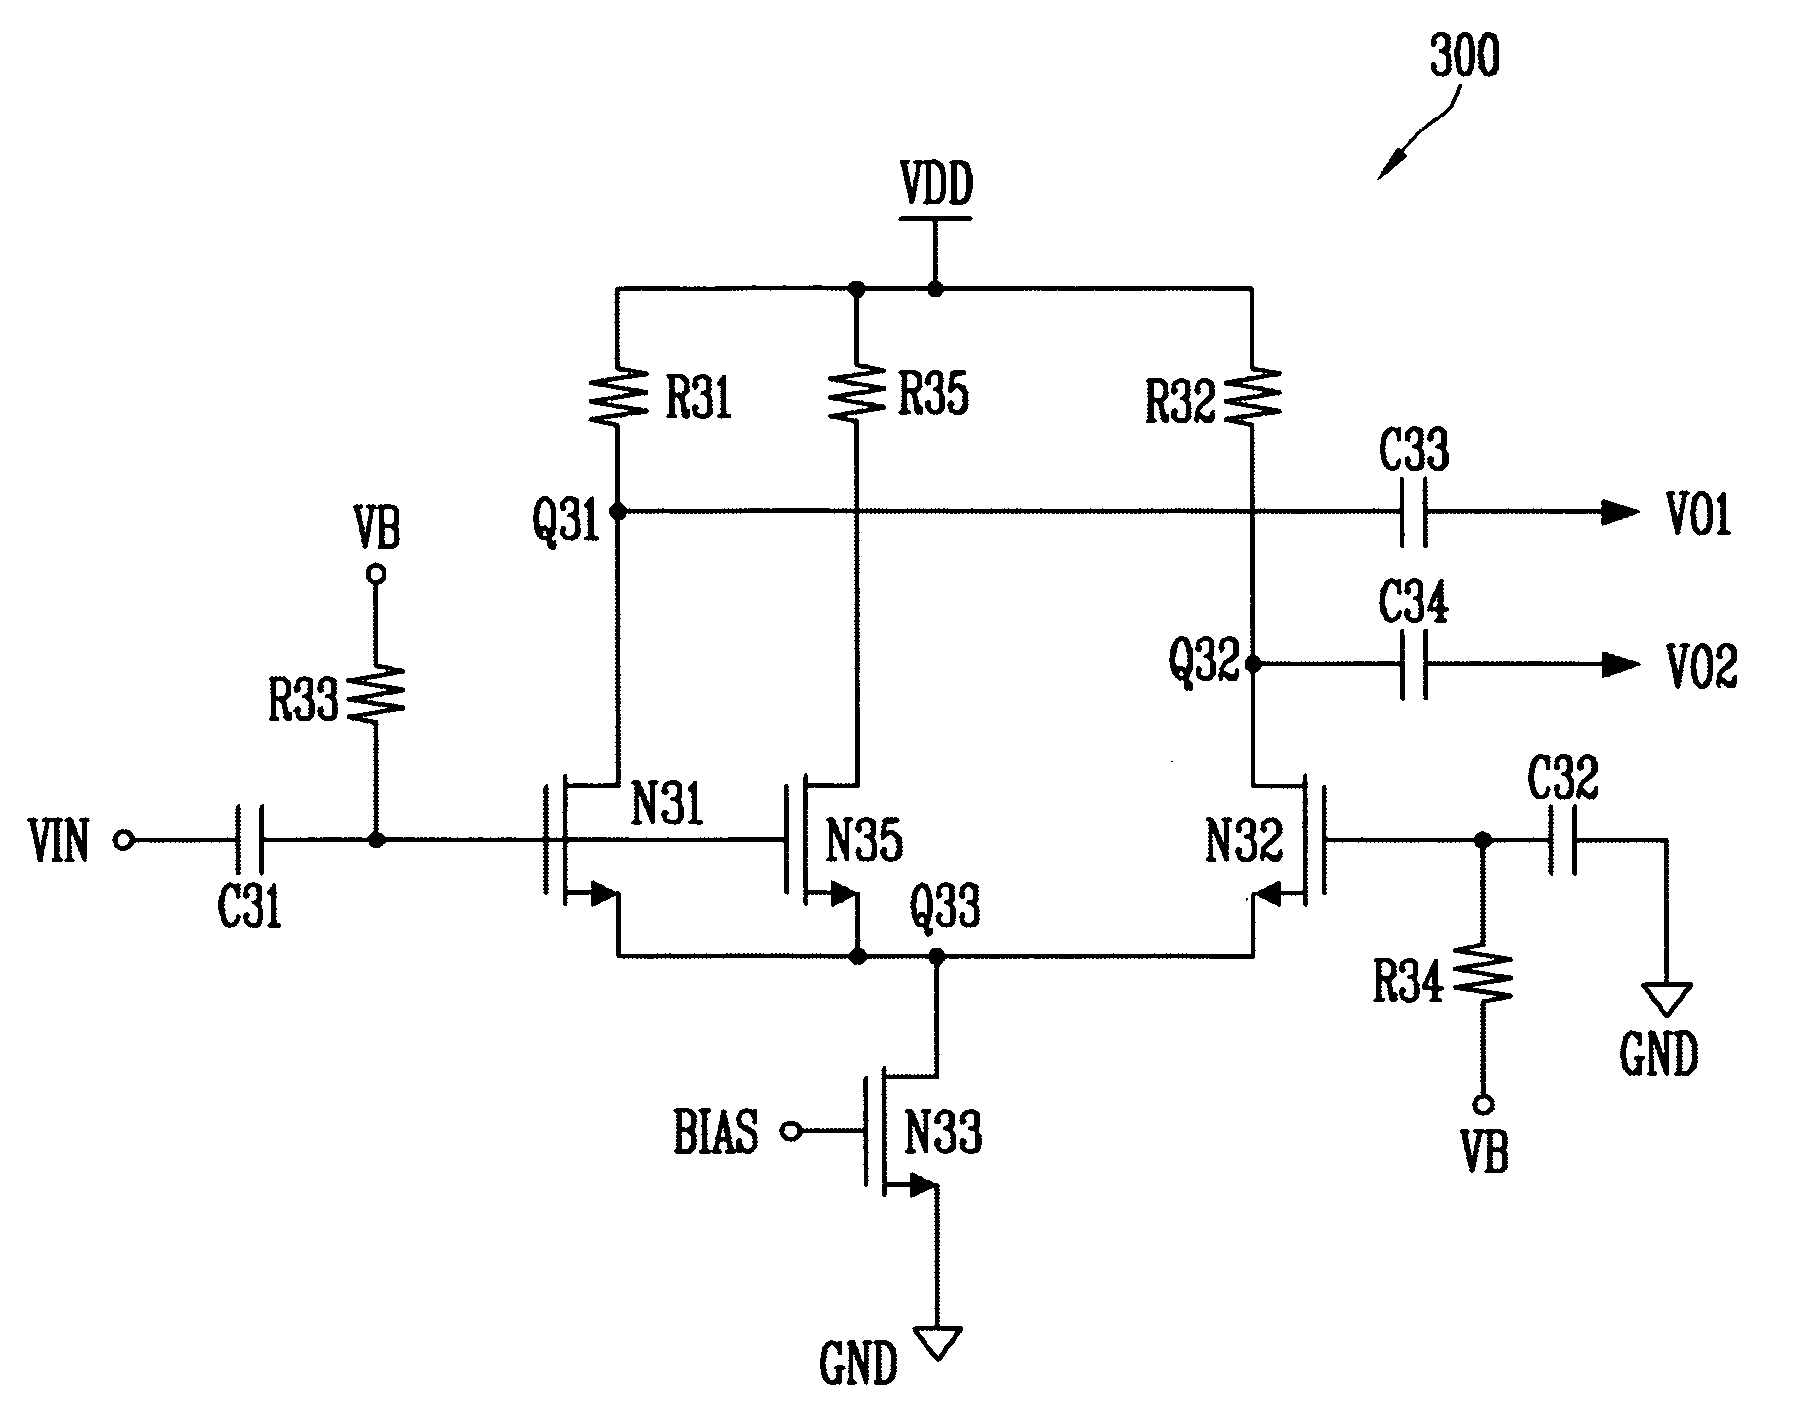 Wideband active balun circuit based on differential amplifier